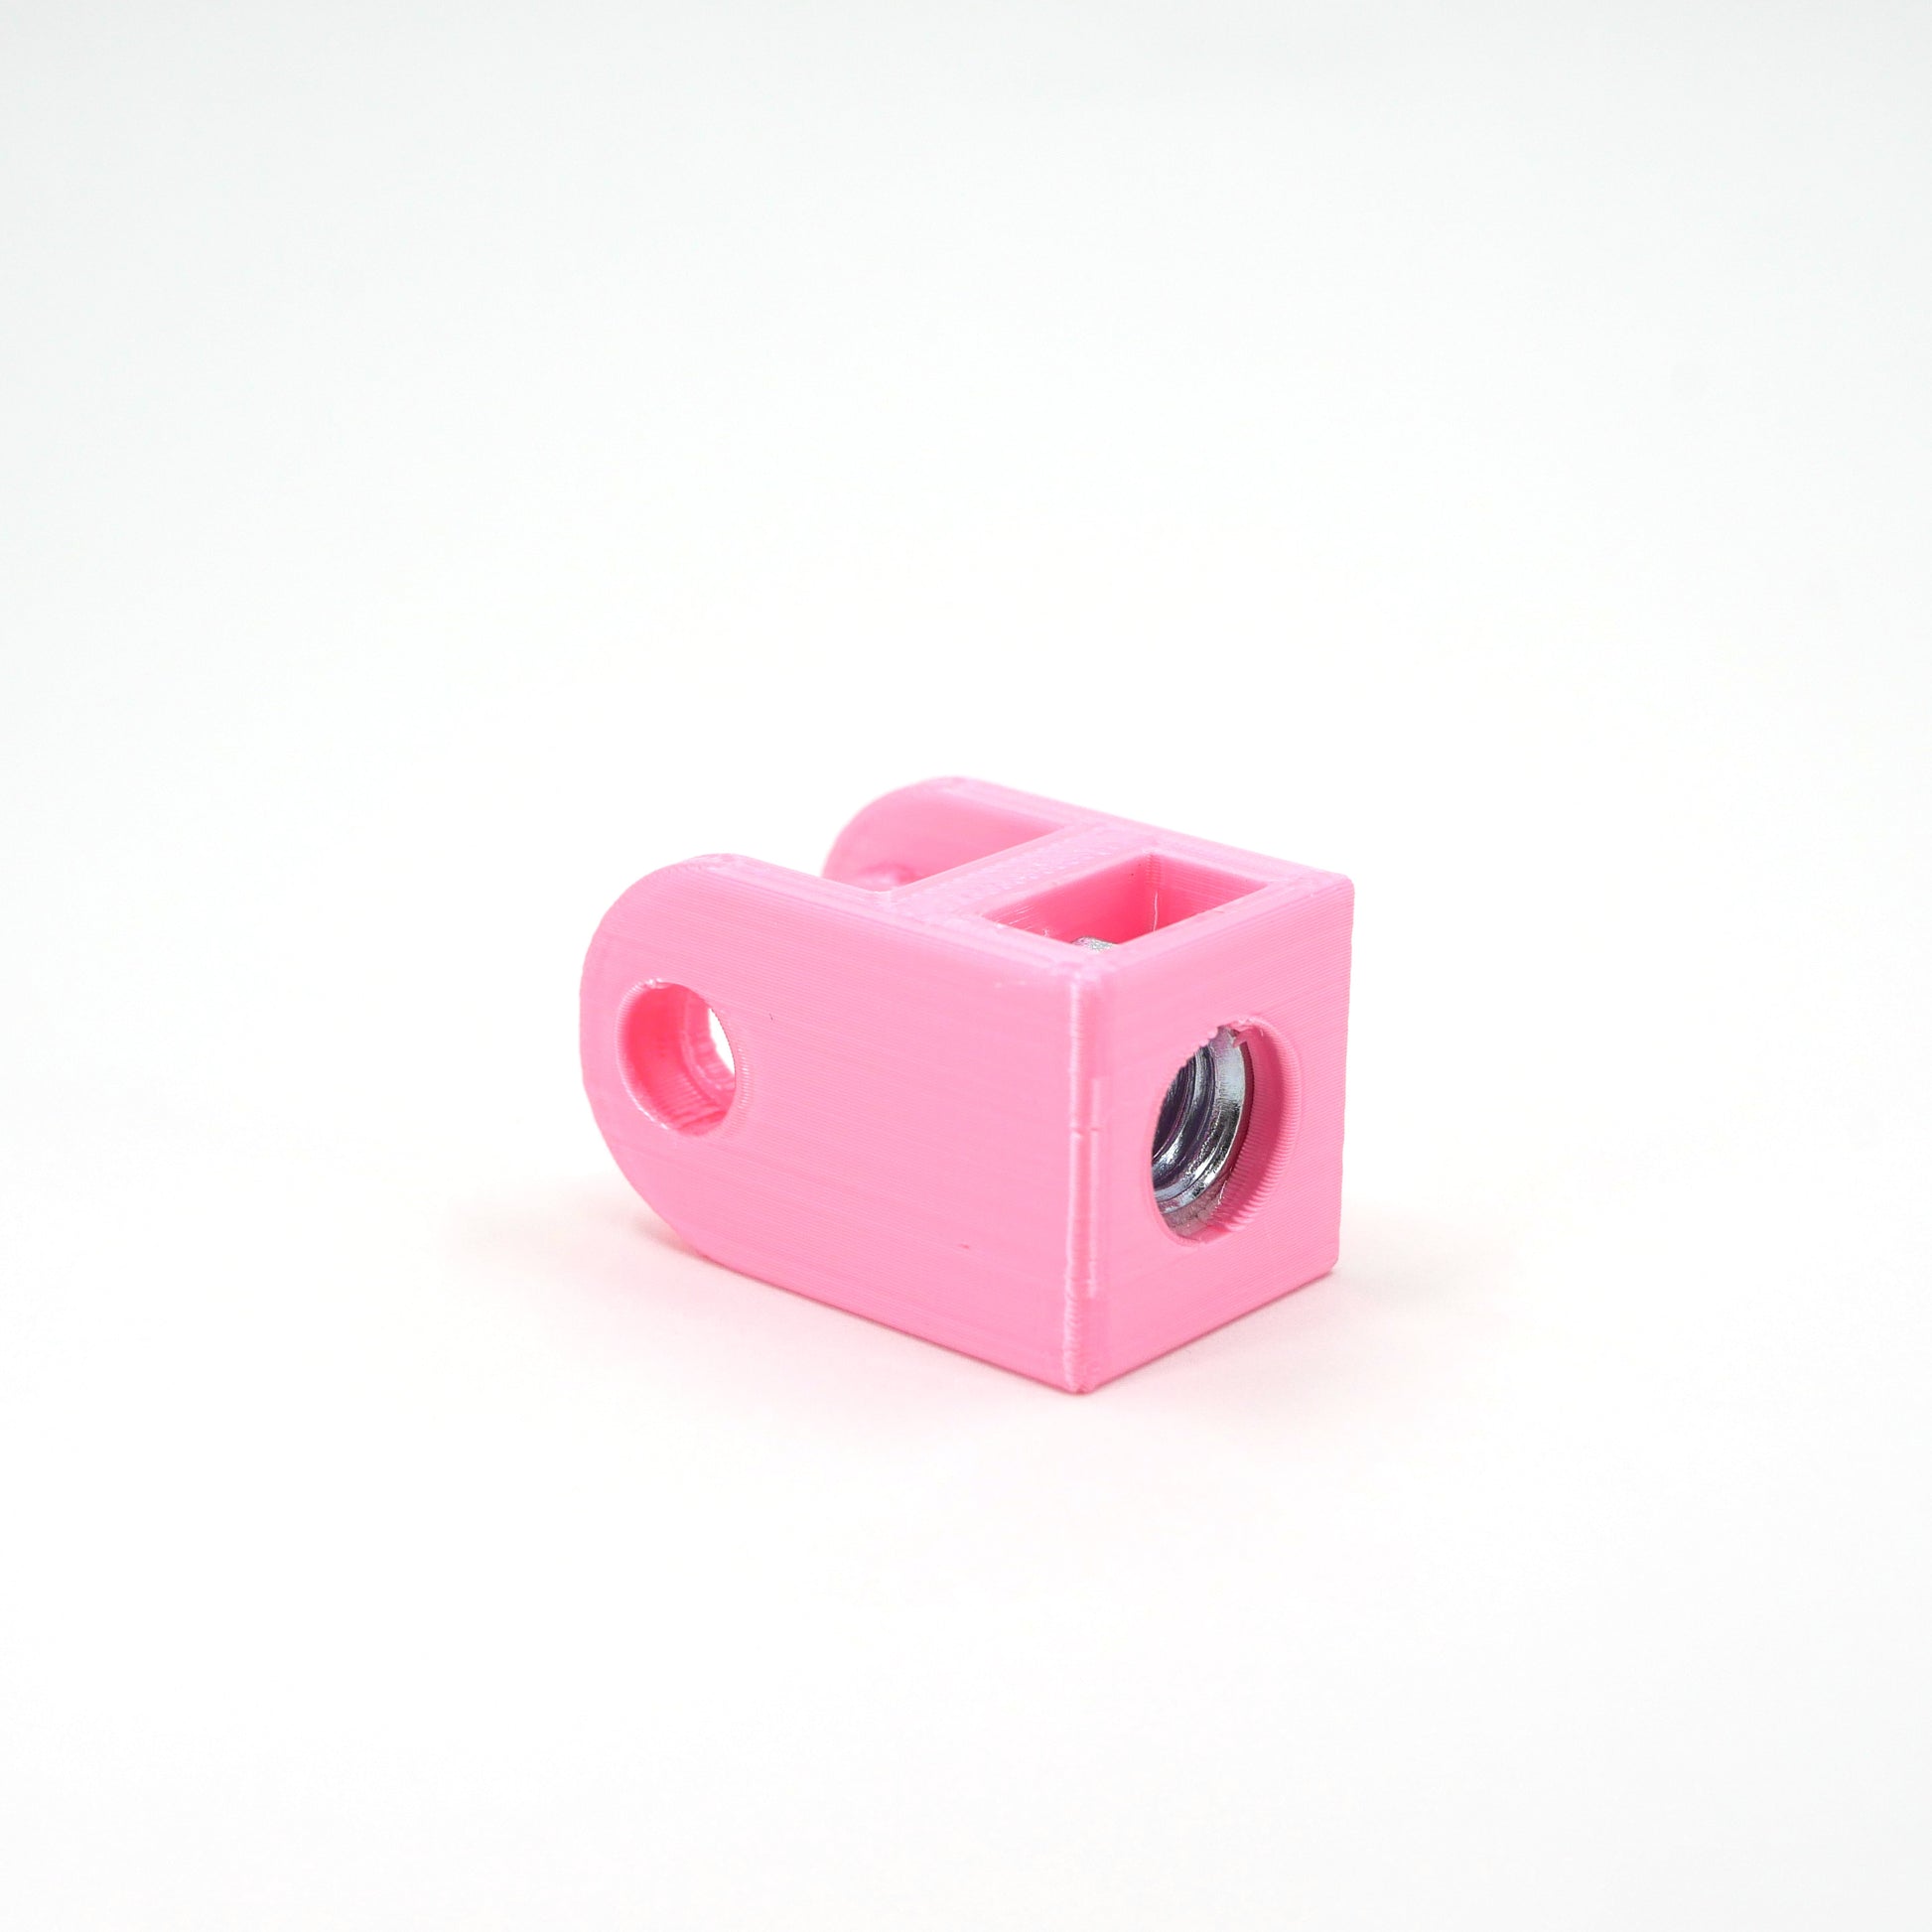 A pink HyperX QuadCast microphone mount adapter sitting at an angle.